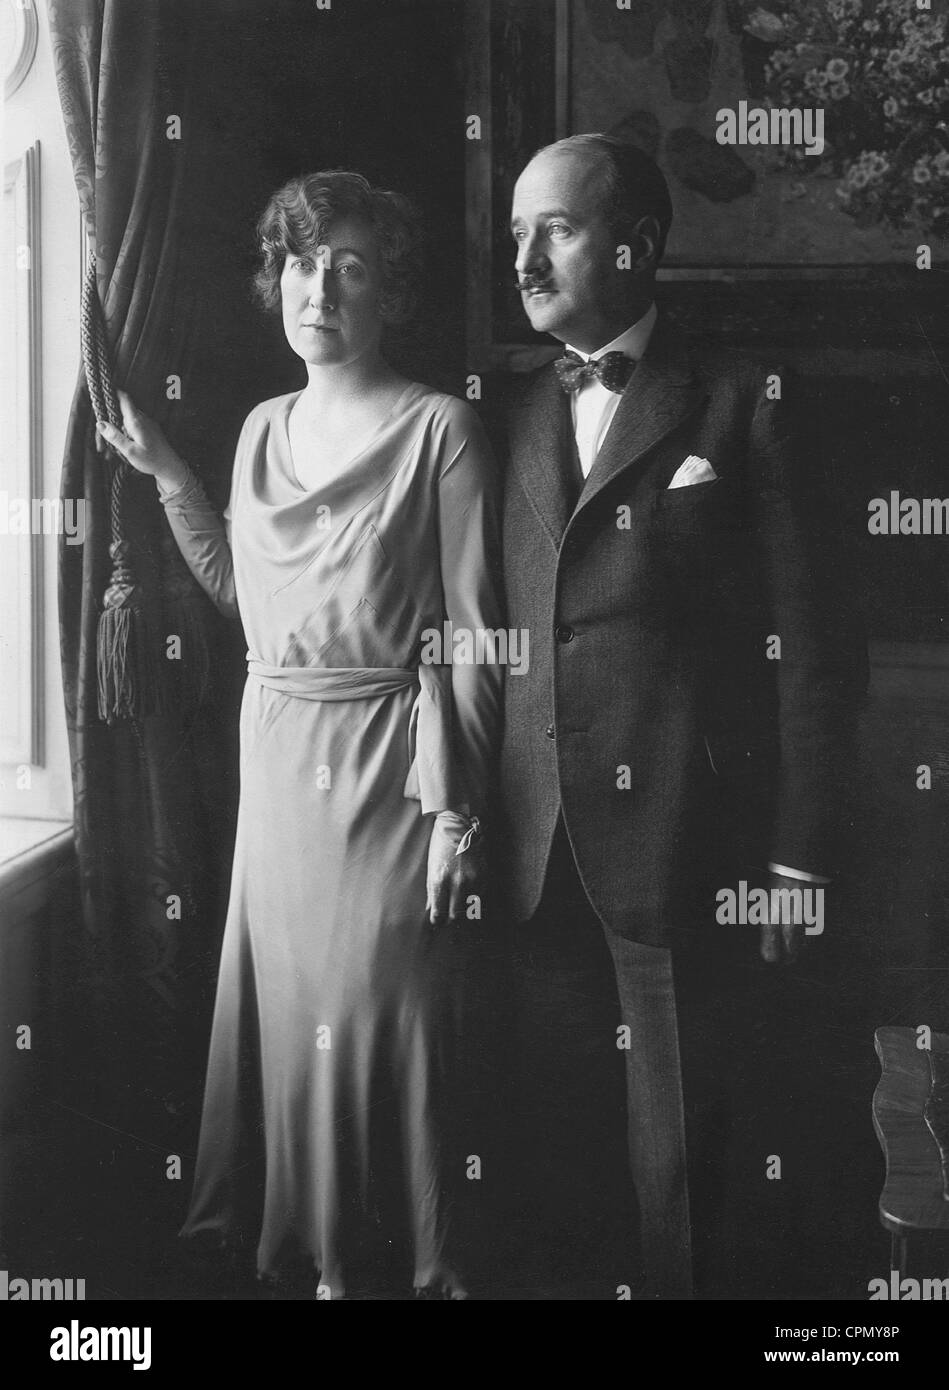 Andre Francois-Poncet with his wife Jacqueline Francois-Poncet Stock ...